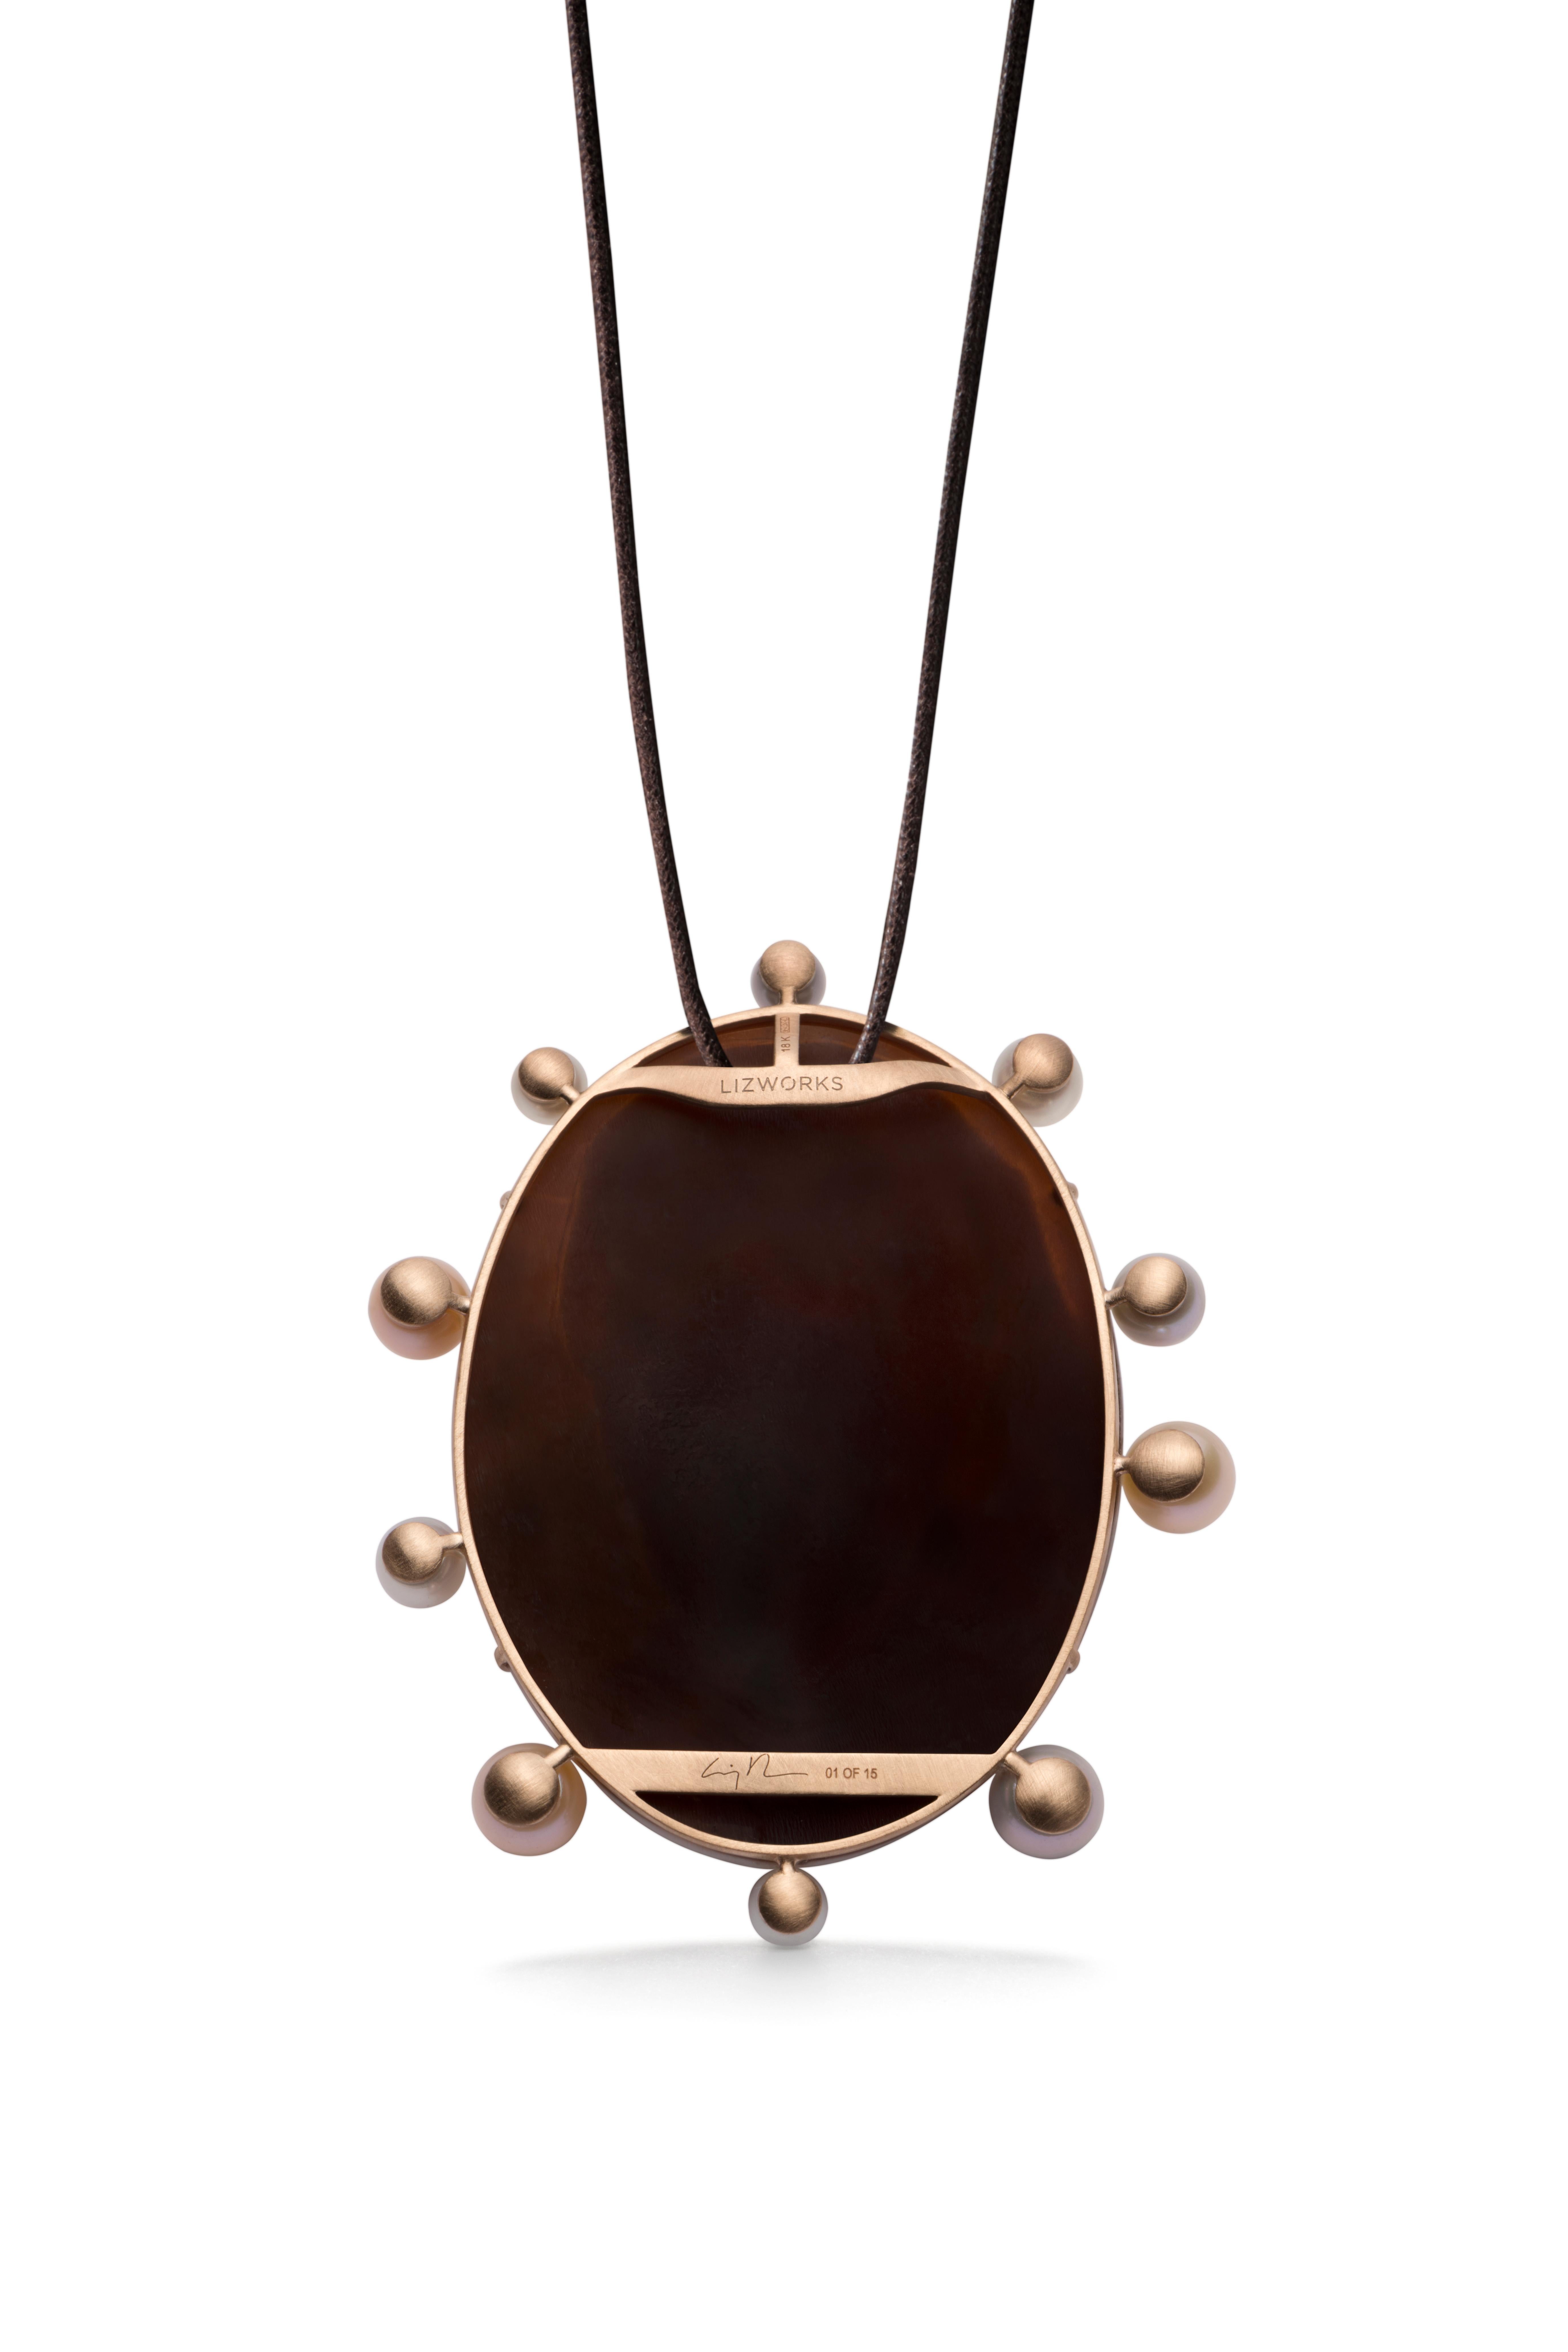 Italian Spa Cameo in 18K Pink Gold with White, Pink and Gray Pearls by Cindy Sherman For Sale